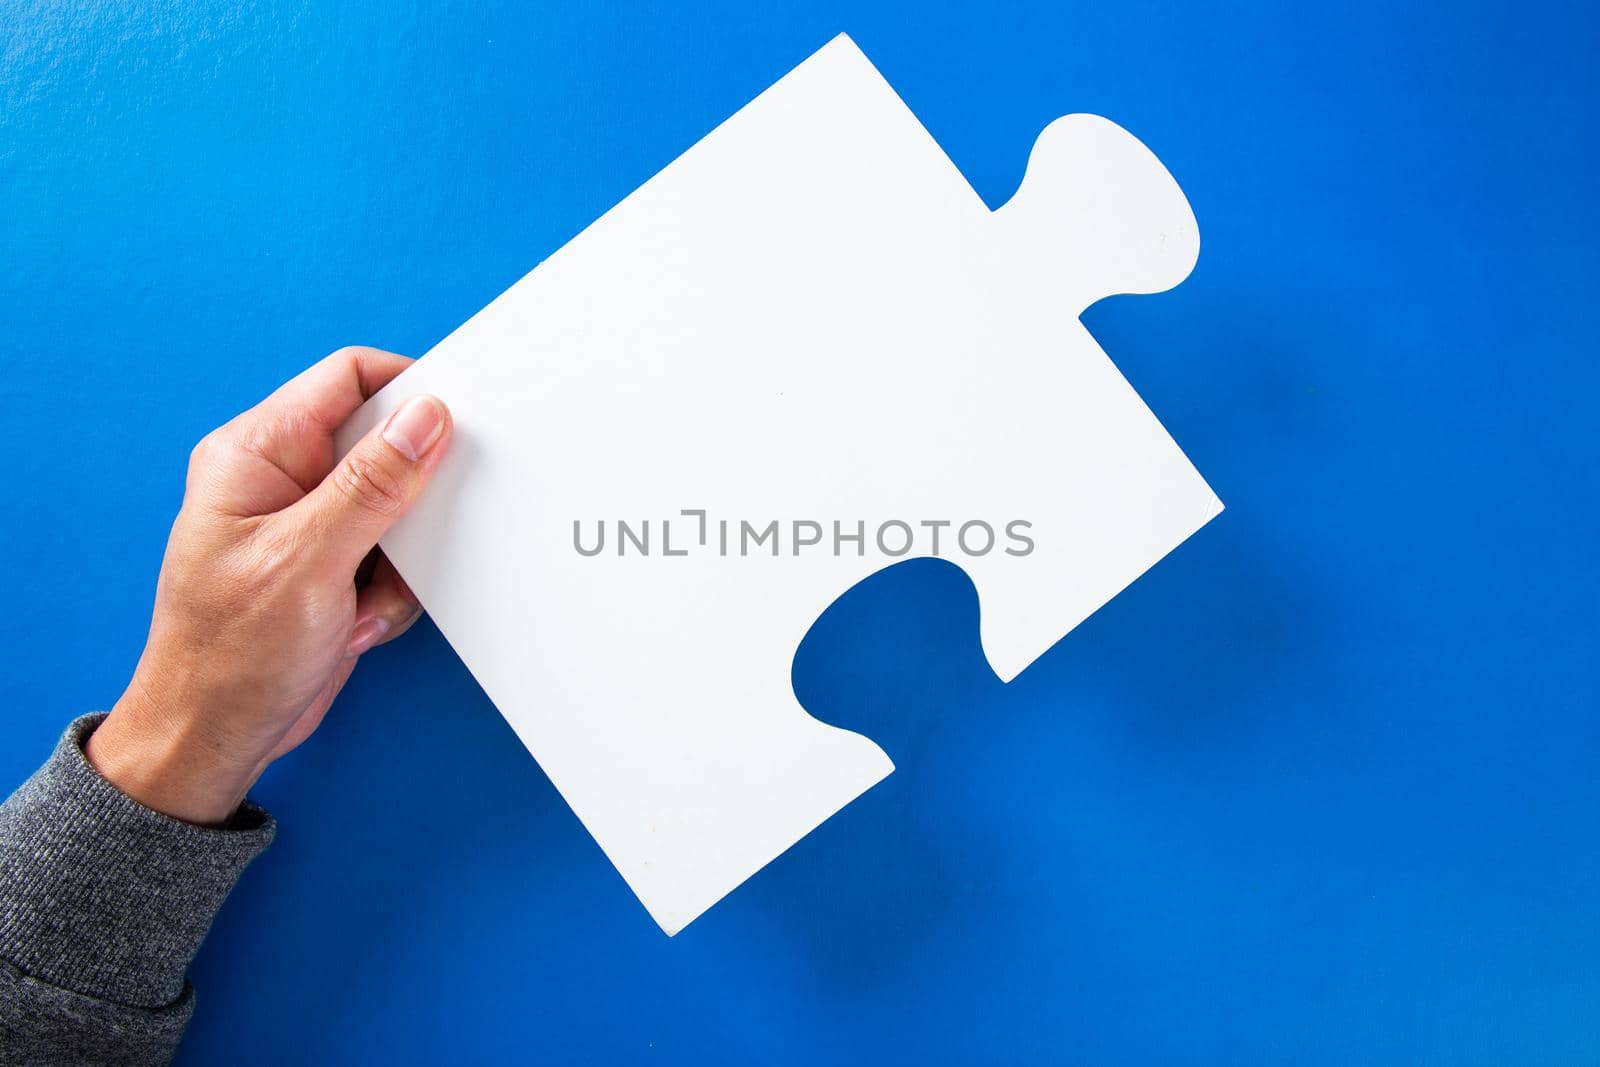 hands holding big paper white blank puzzles on a blue background, concept of business